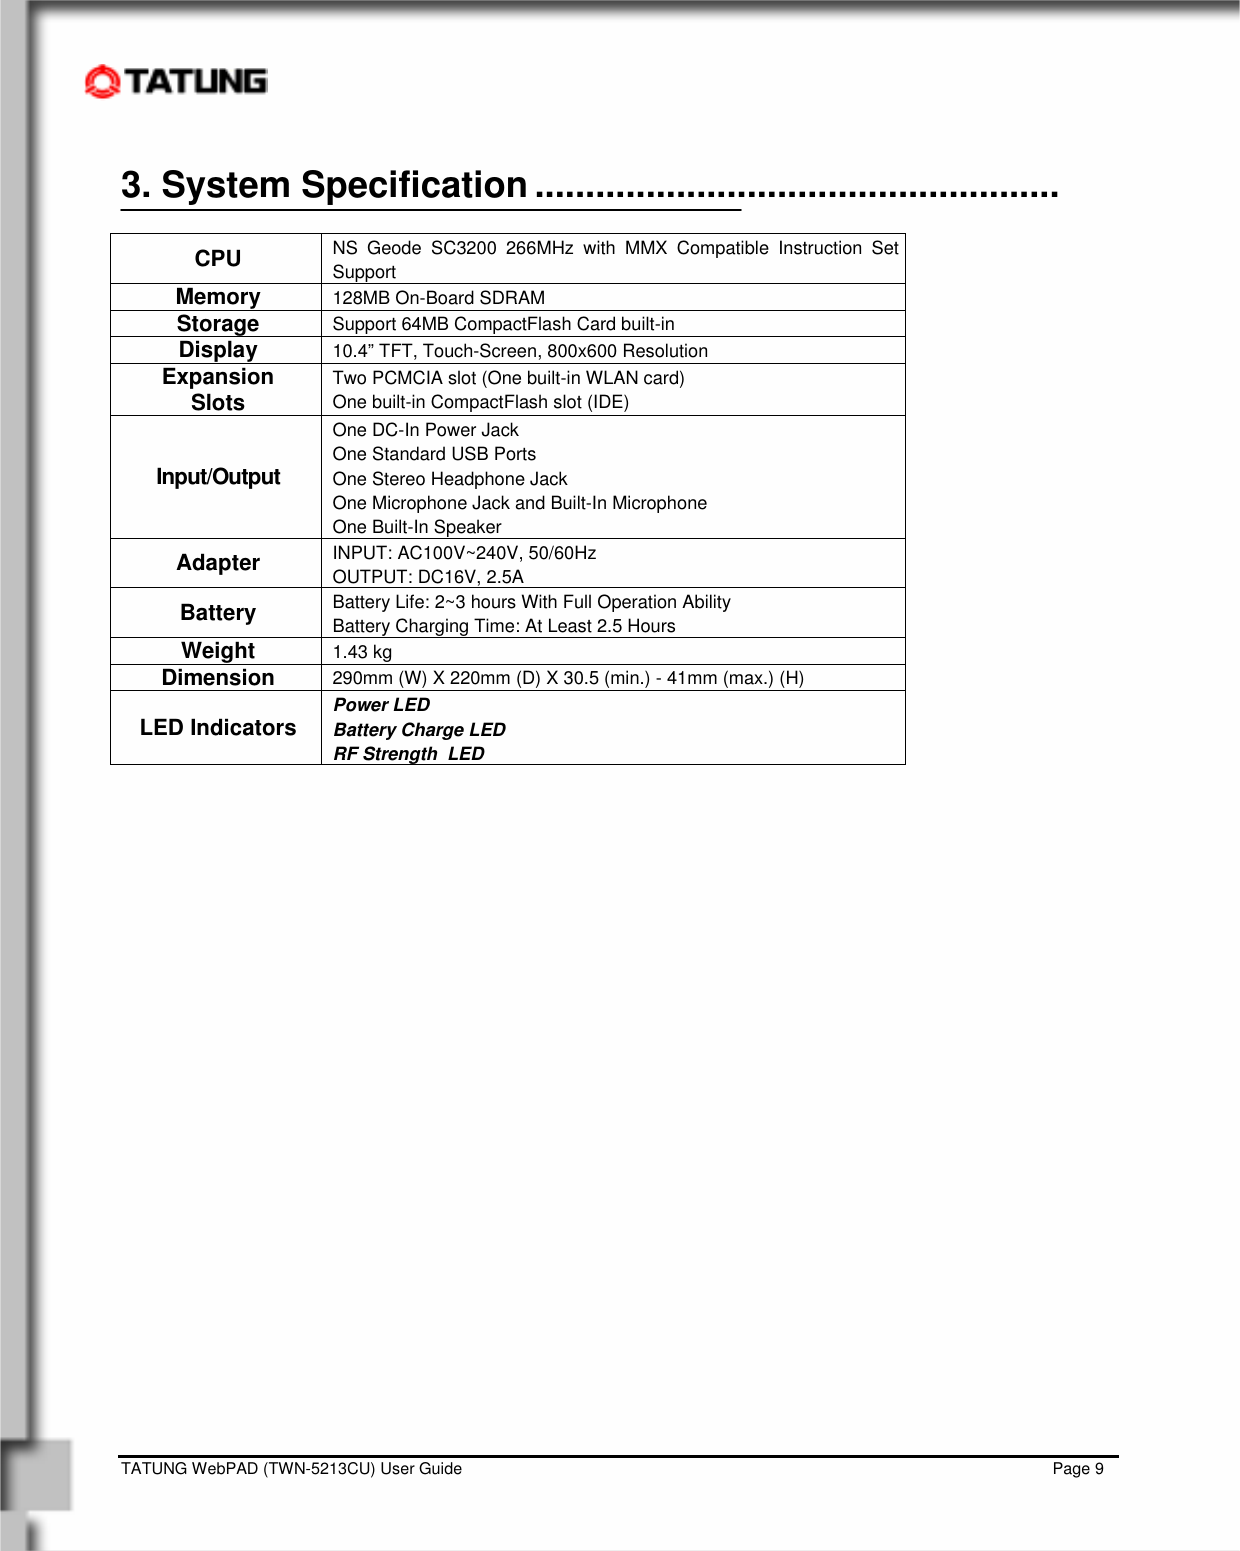    TATUNG WebPAD (TWN-5213CU) User Guide                                                                                                                                   Page 9 3. System Specification ....................................................  CPU  NS Geode SC3200 266MHz with MMX Compatible Instruction Set Support Memory  128MB On-Board SDRAM Storage  Support 64MB CompactFlash Card built-in Display  10.4” TFT, Touch-Screen, 800x600 Resolution  Expansion Slots  Two PCMCIA slot (One built-in WLAN card) One built-in CompactFlash slot (IDE) Input/Output One DC-In Power Jack One Standard USB Ports One Stereo Headphone Jack One Microphone Jack and Built-In Microphone One Built-In Speaker Adapter  INPUT: AC100V~240V, 50/60Hz OUTPUT: DC16V, 2.5A Battery  Battery Life: 2~3 hours With Full Operation Ability Battery Charging Time: At Least 2.5 Hours Weight  1.43 kg  Dimension  290mm (W) X 220mm (D) X 30.5 (min.) - 41mm (max.) (H) LED Indicators  Power LED Battery Charge LED RF Strength  LED 